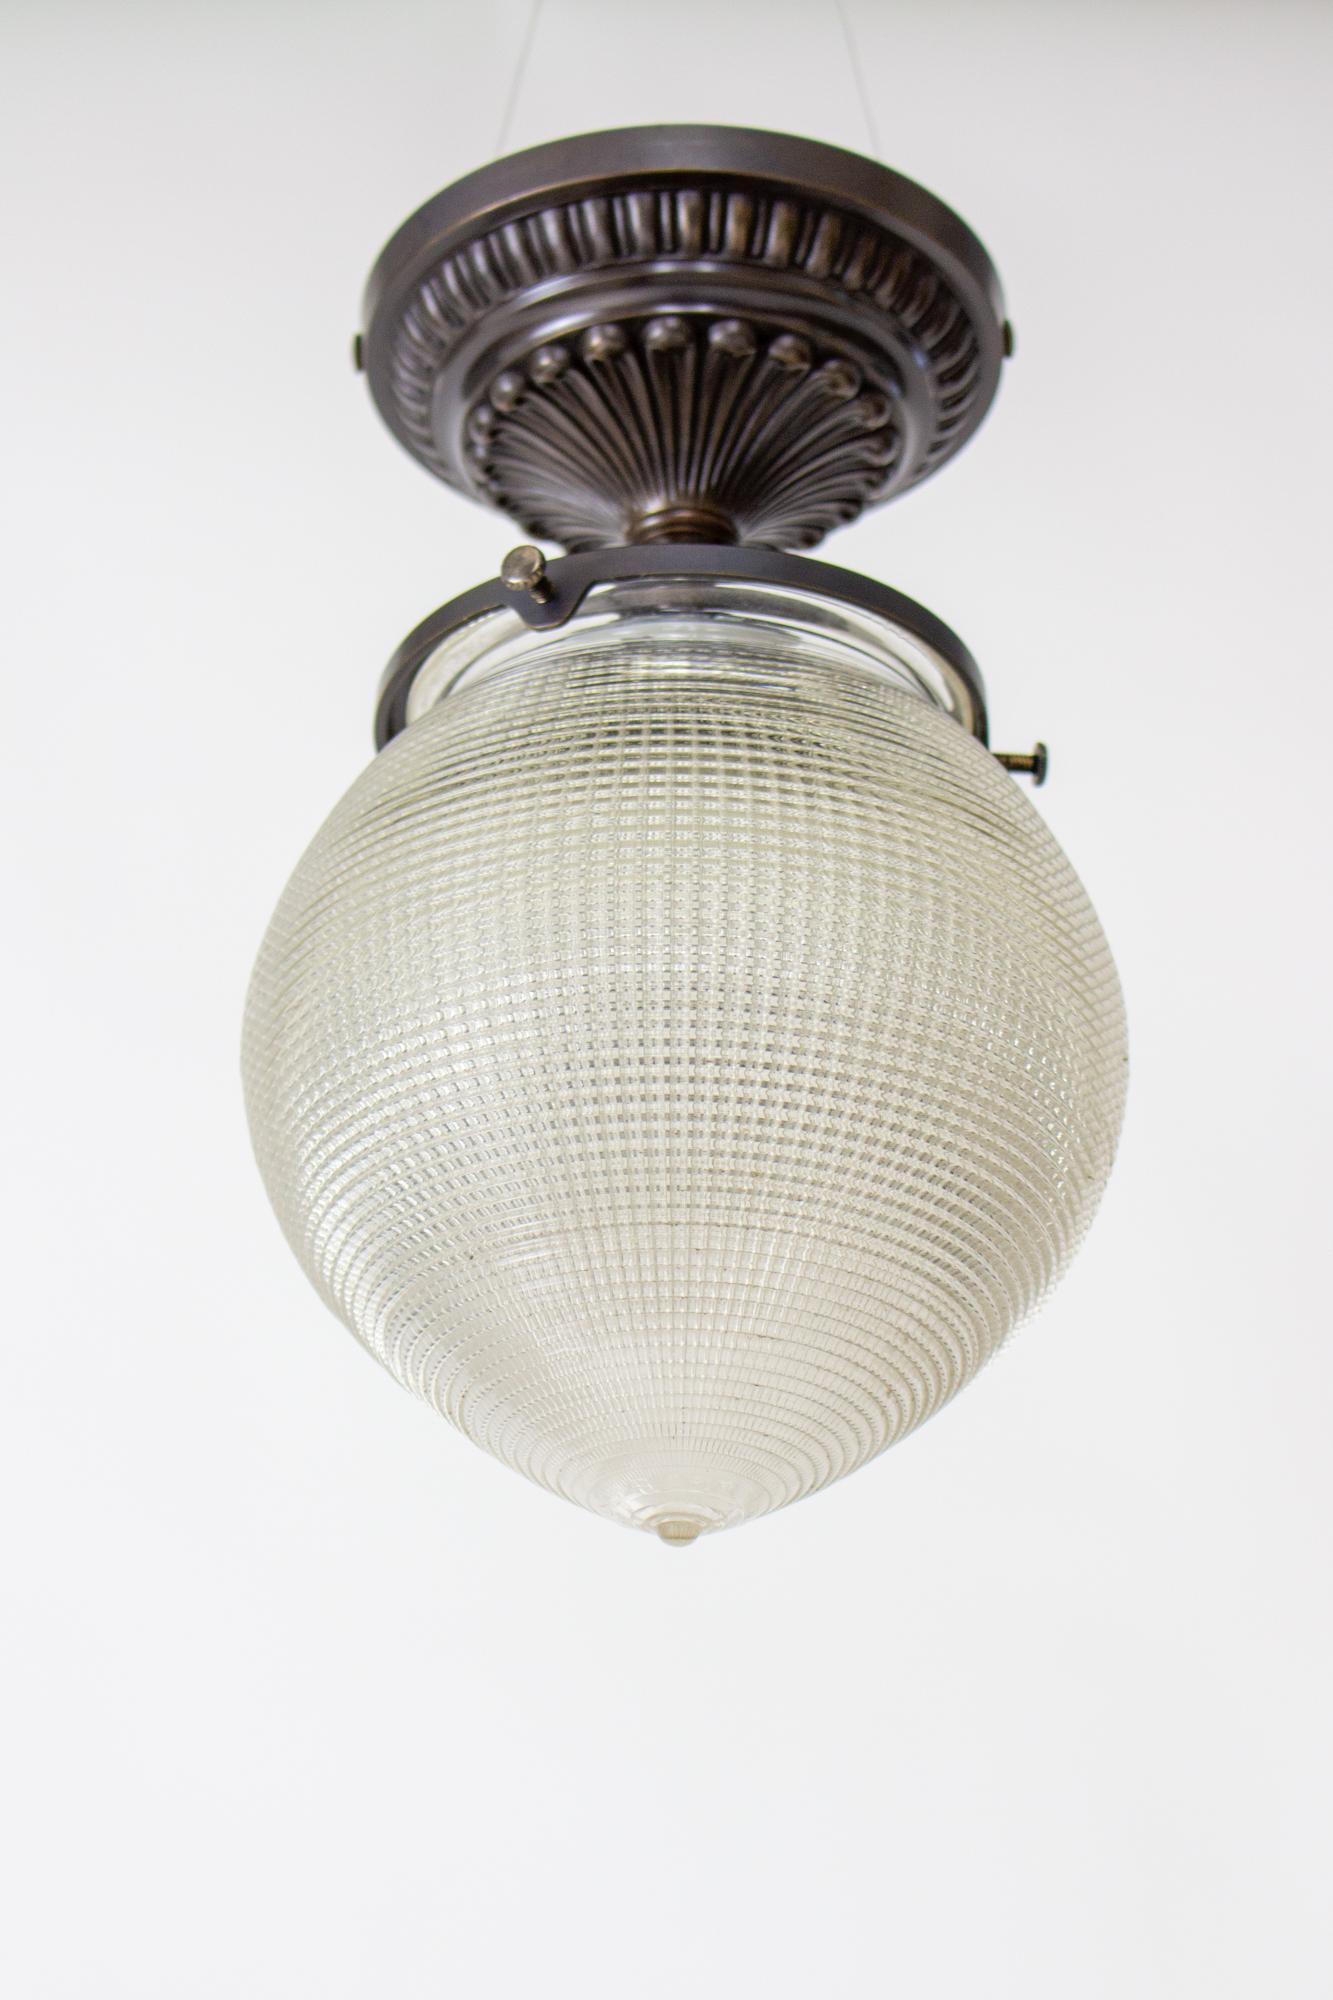 Early 20th century Holophane prismatic flush mount fixture. Signed Holophane prismatic pointed glass shade. Darkened brass fixture with decorative cast canopy with a 4 ¾” diameter. Porcelain socket, can use up to 150 watts. Fixture is custom and in